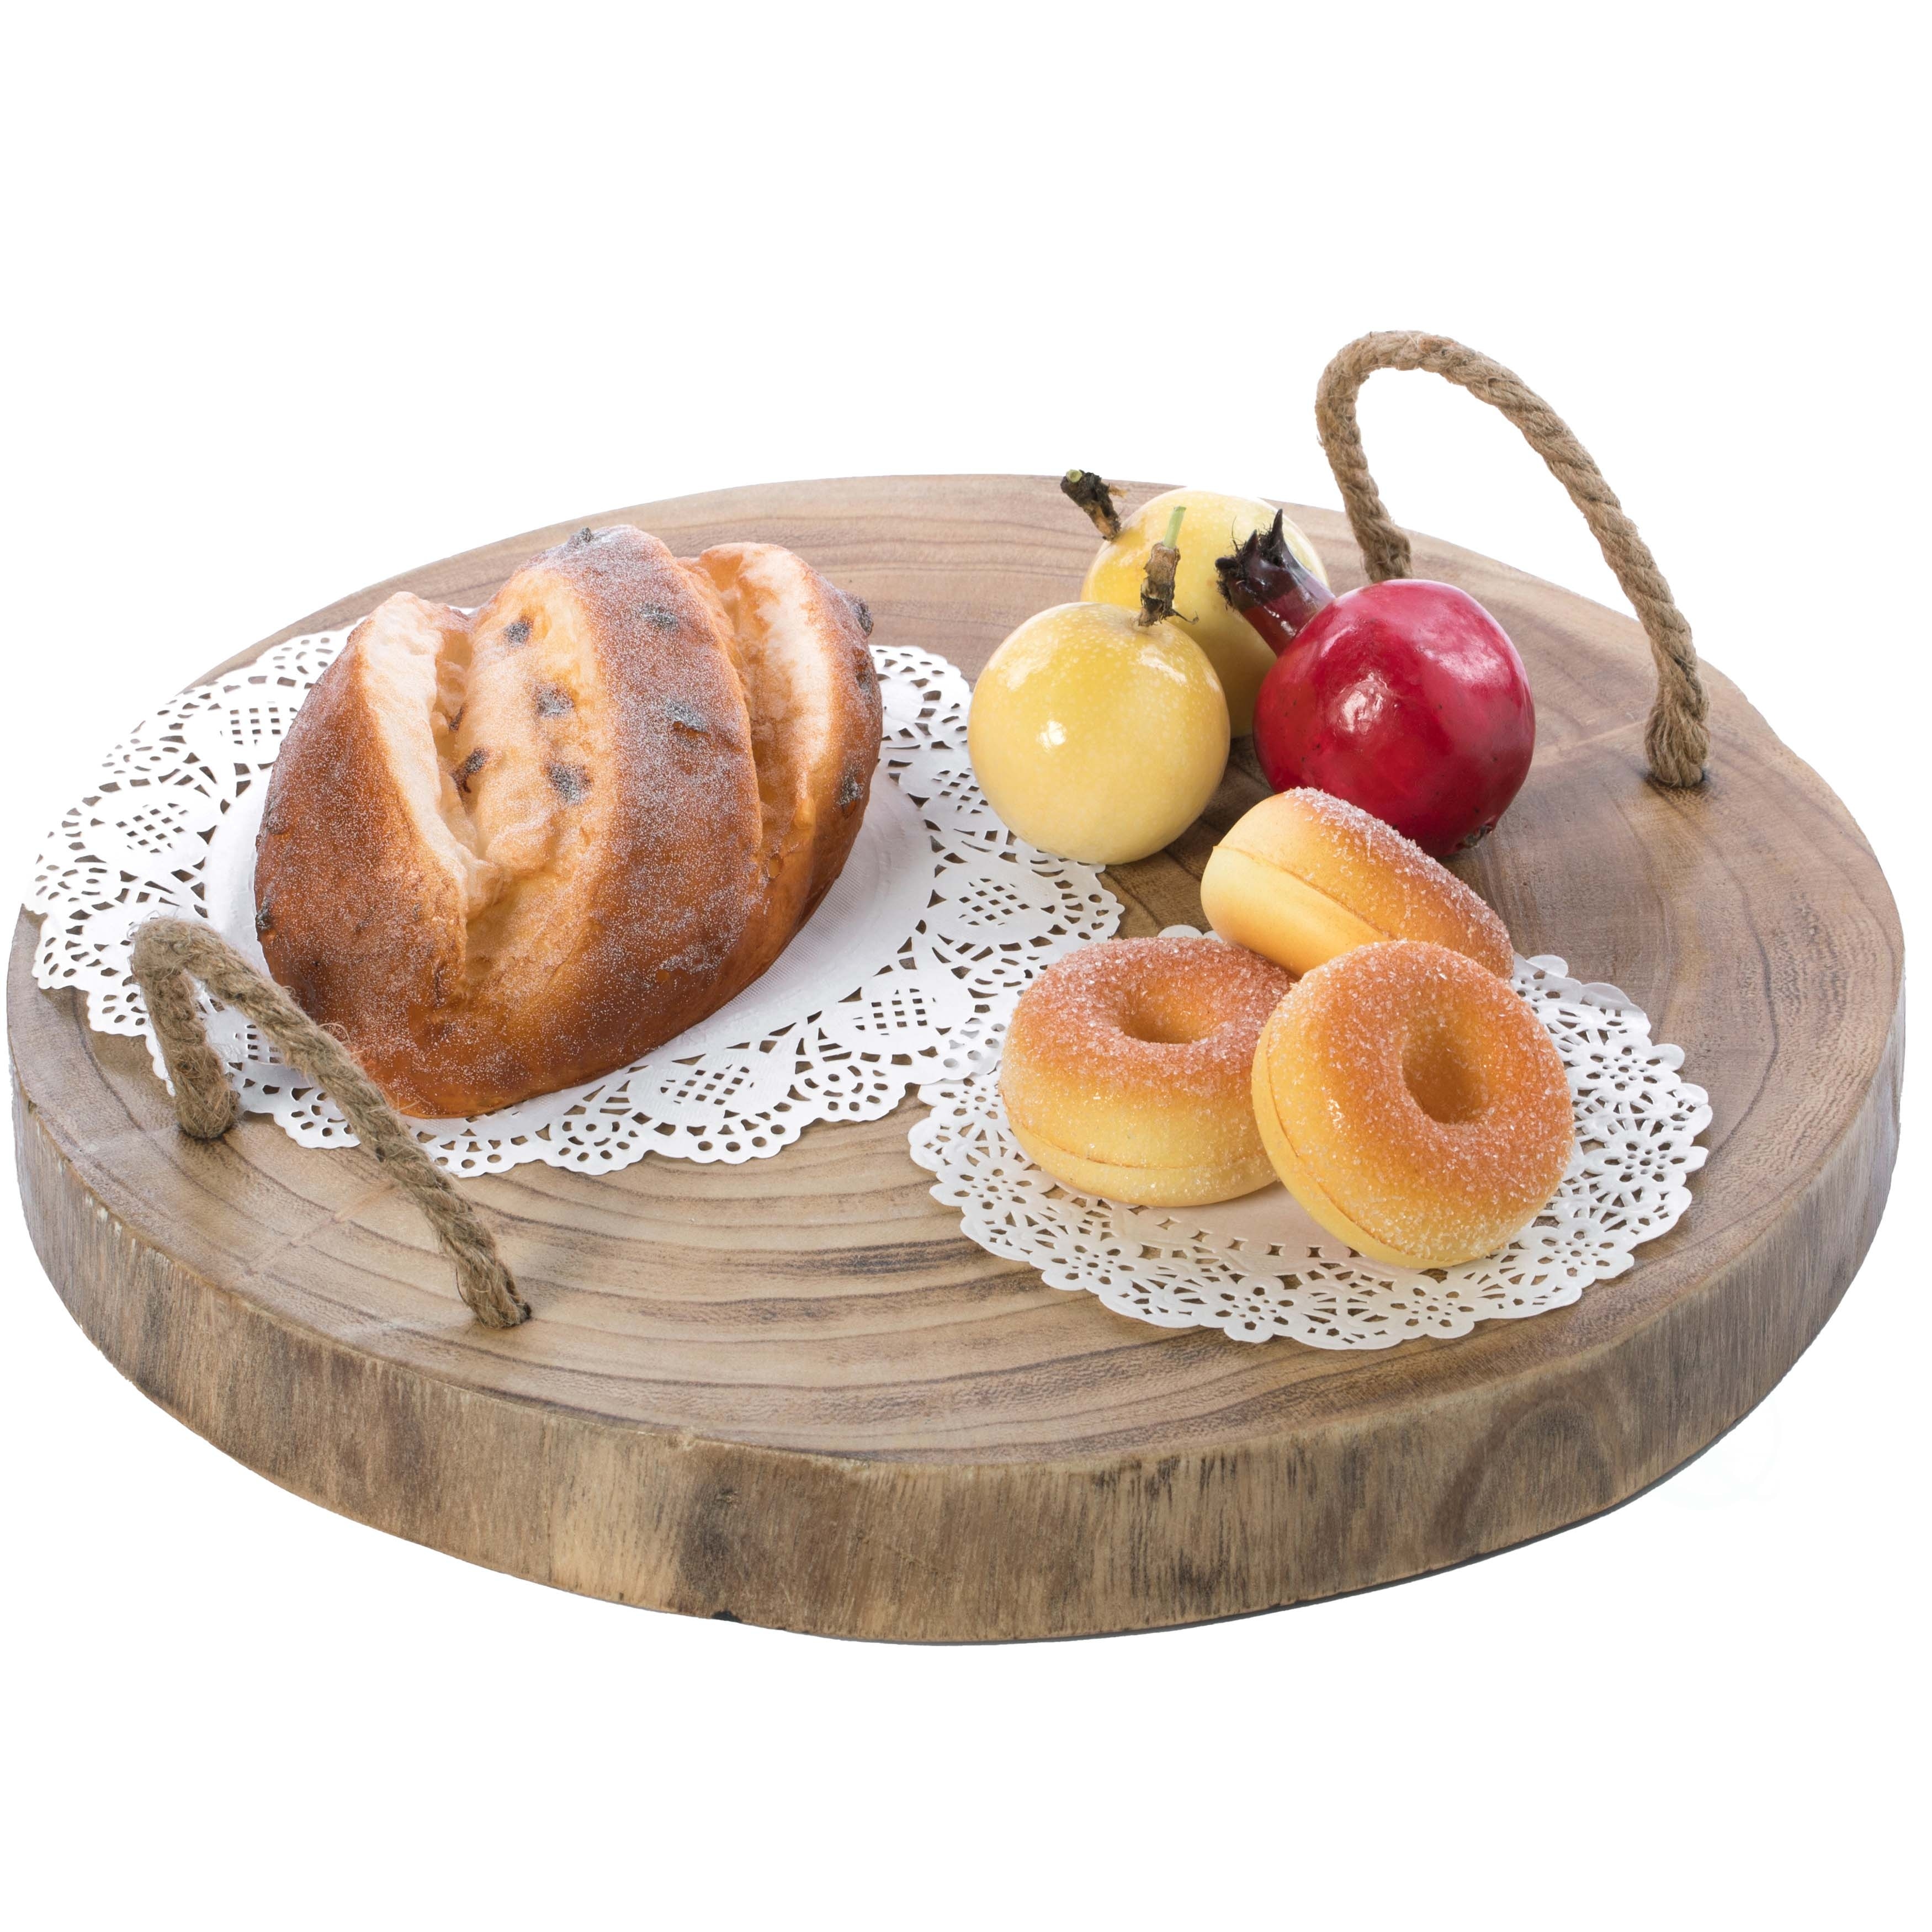 Lazy Susan Mango Wood Serve Tray with Removable Dividers, 18 Inch –  Pfaltzgraff